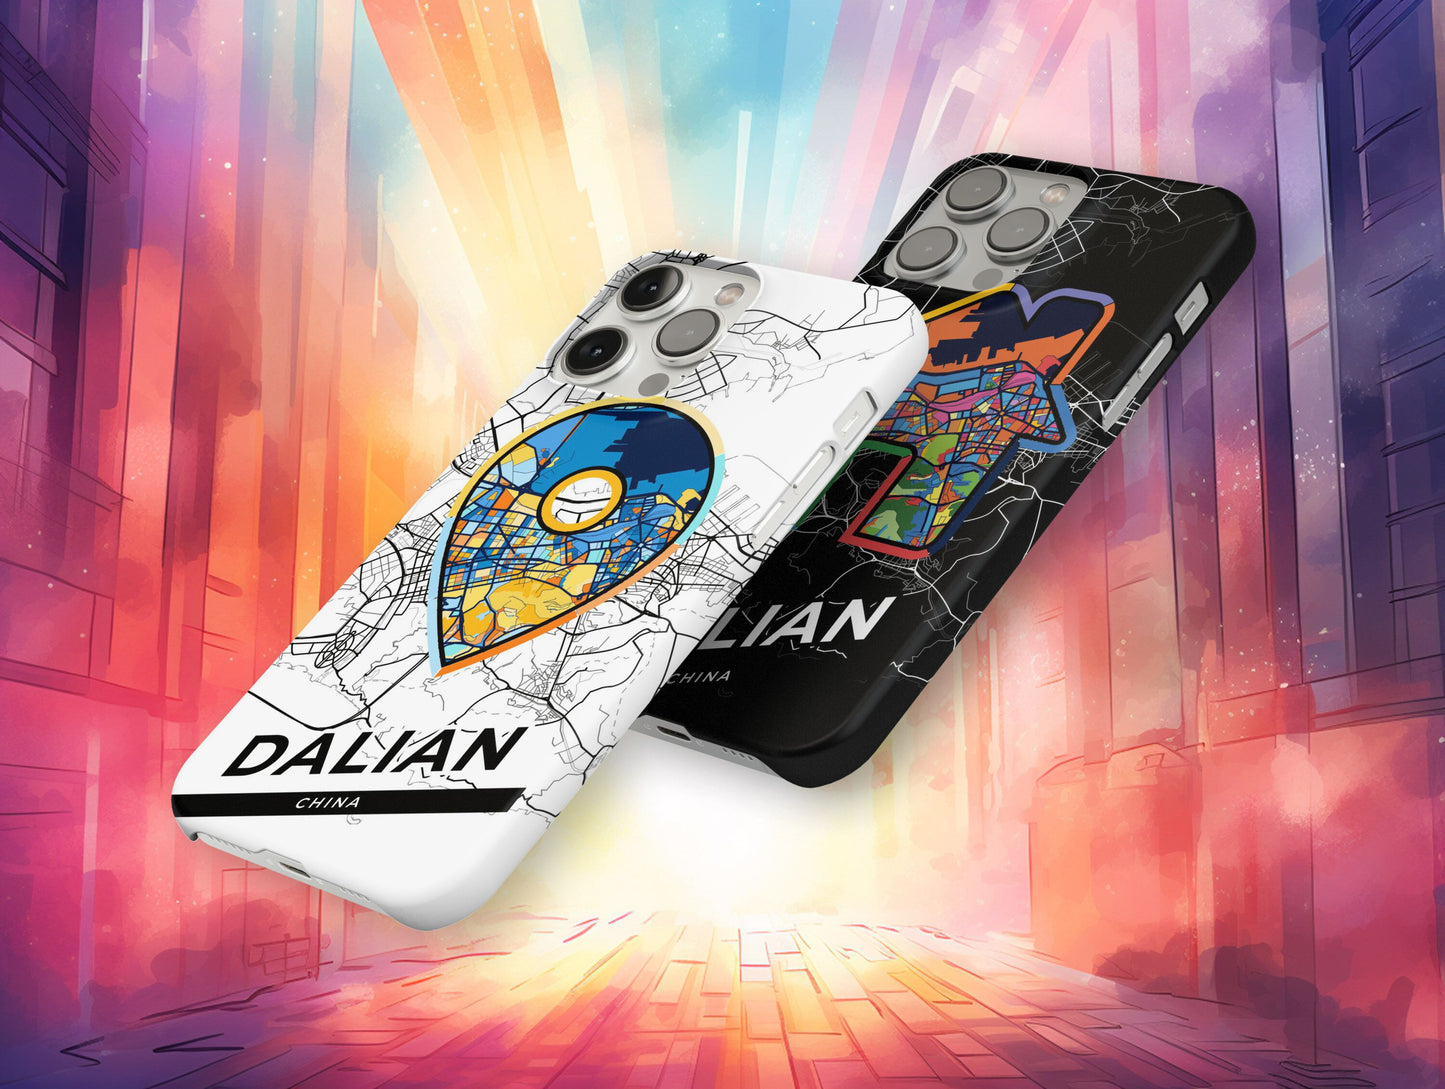 Dalian China slim phone case with colorful icon. Birthday, wedding or housewarming gift. Couple match cases.